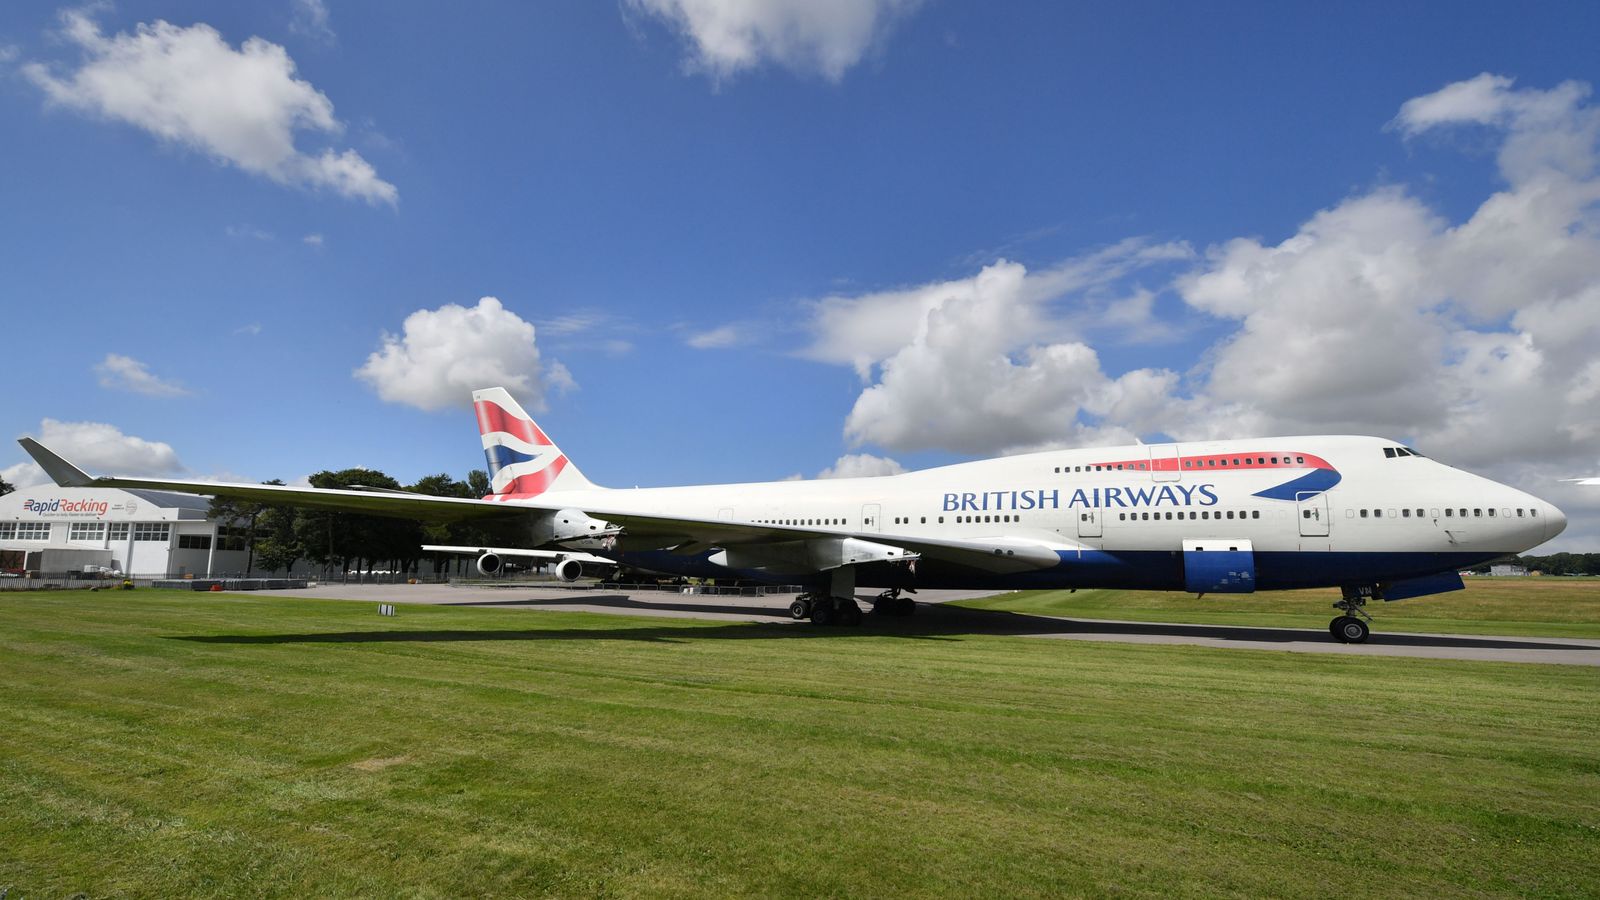 Converting a retired British Airways Boeing 747 into a cinema and museum |  UK News